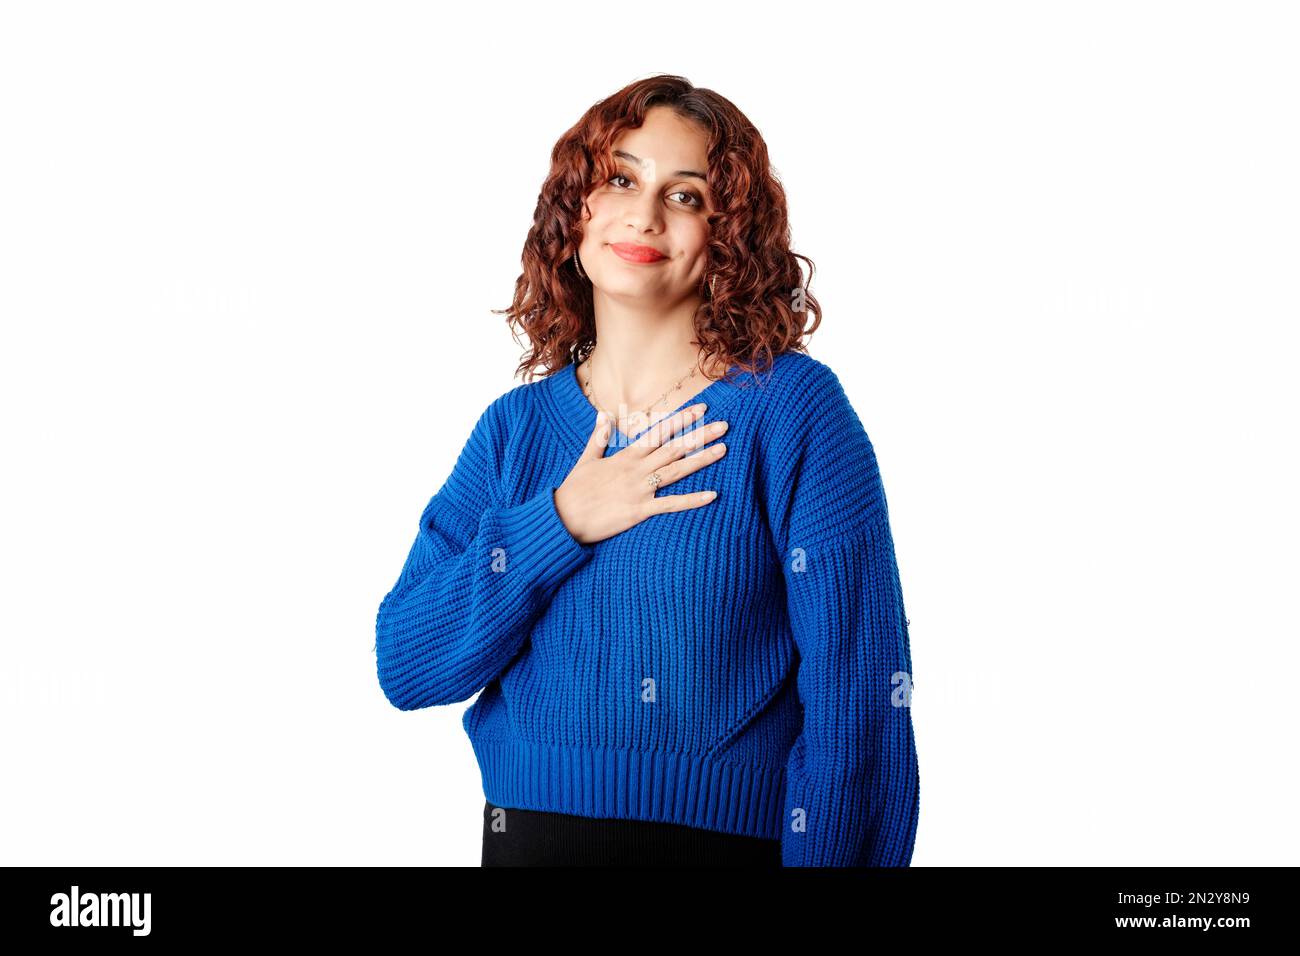 Portrait of young woman wearing knitted sweater standing isolated over white background touching chest with her palm, smiles tenderly and looks at the Stock Photo